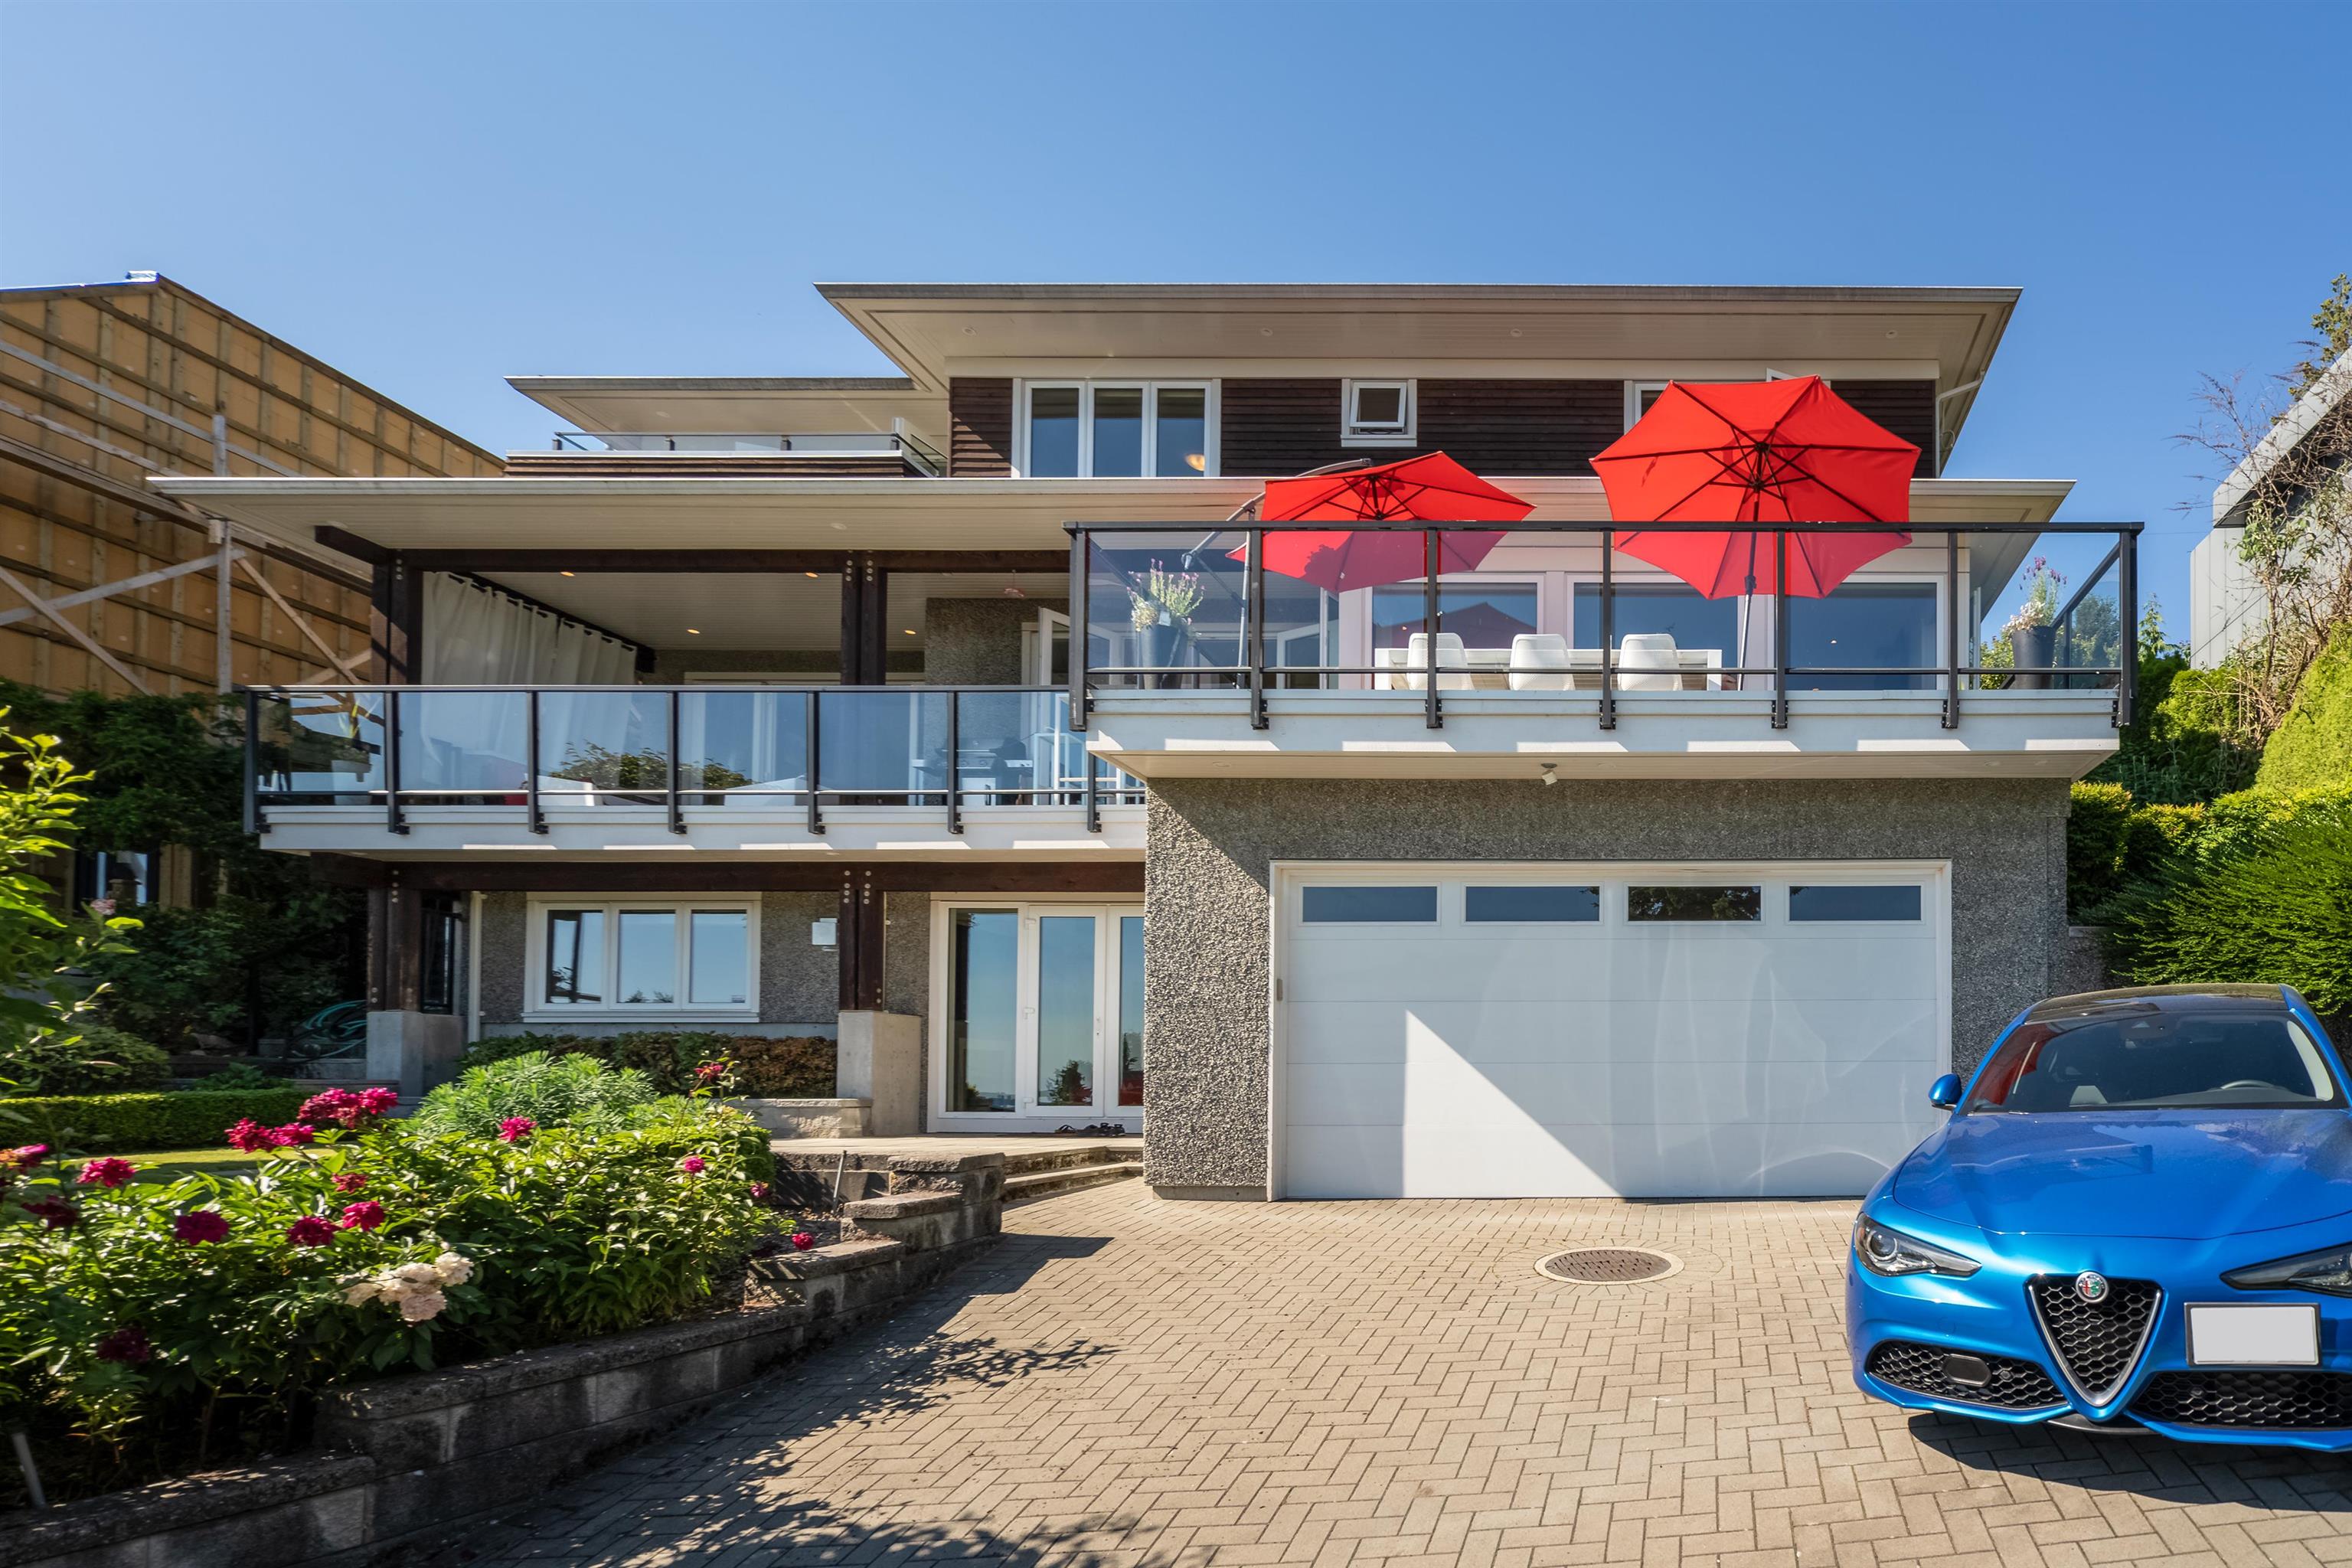 Listing image of 2380 PALMERSTON AVENUE